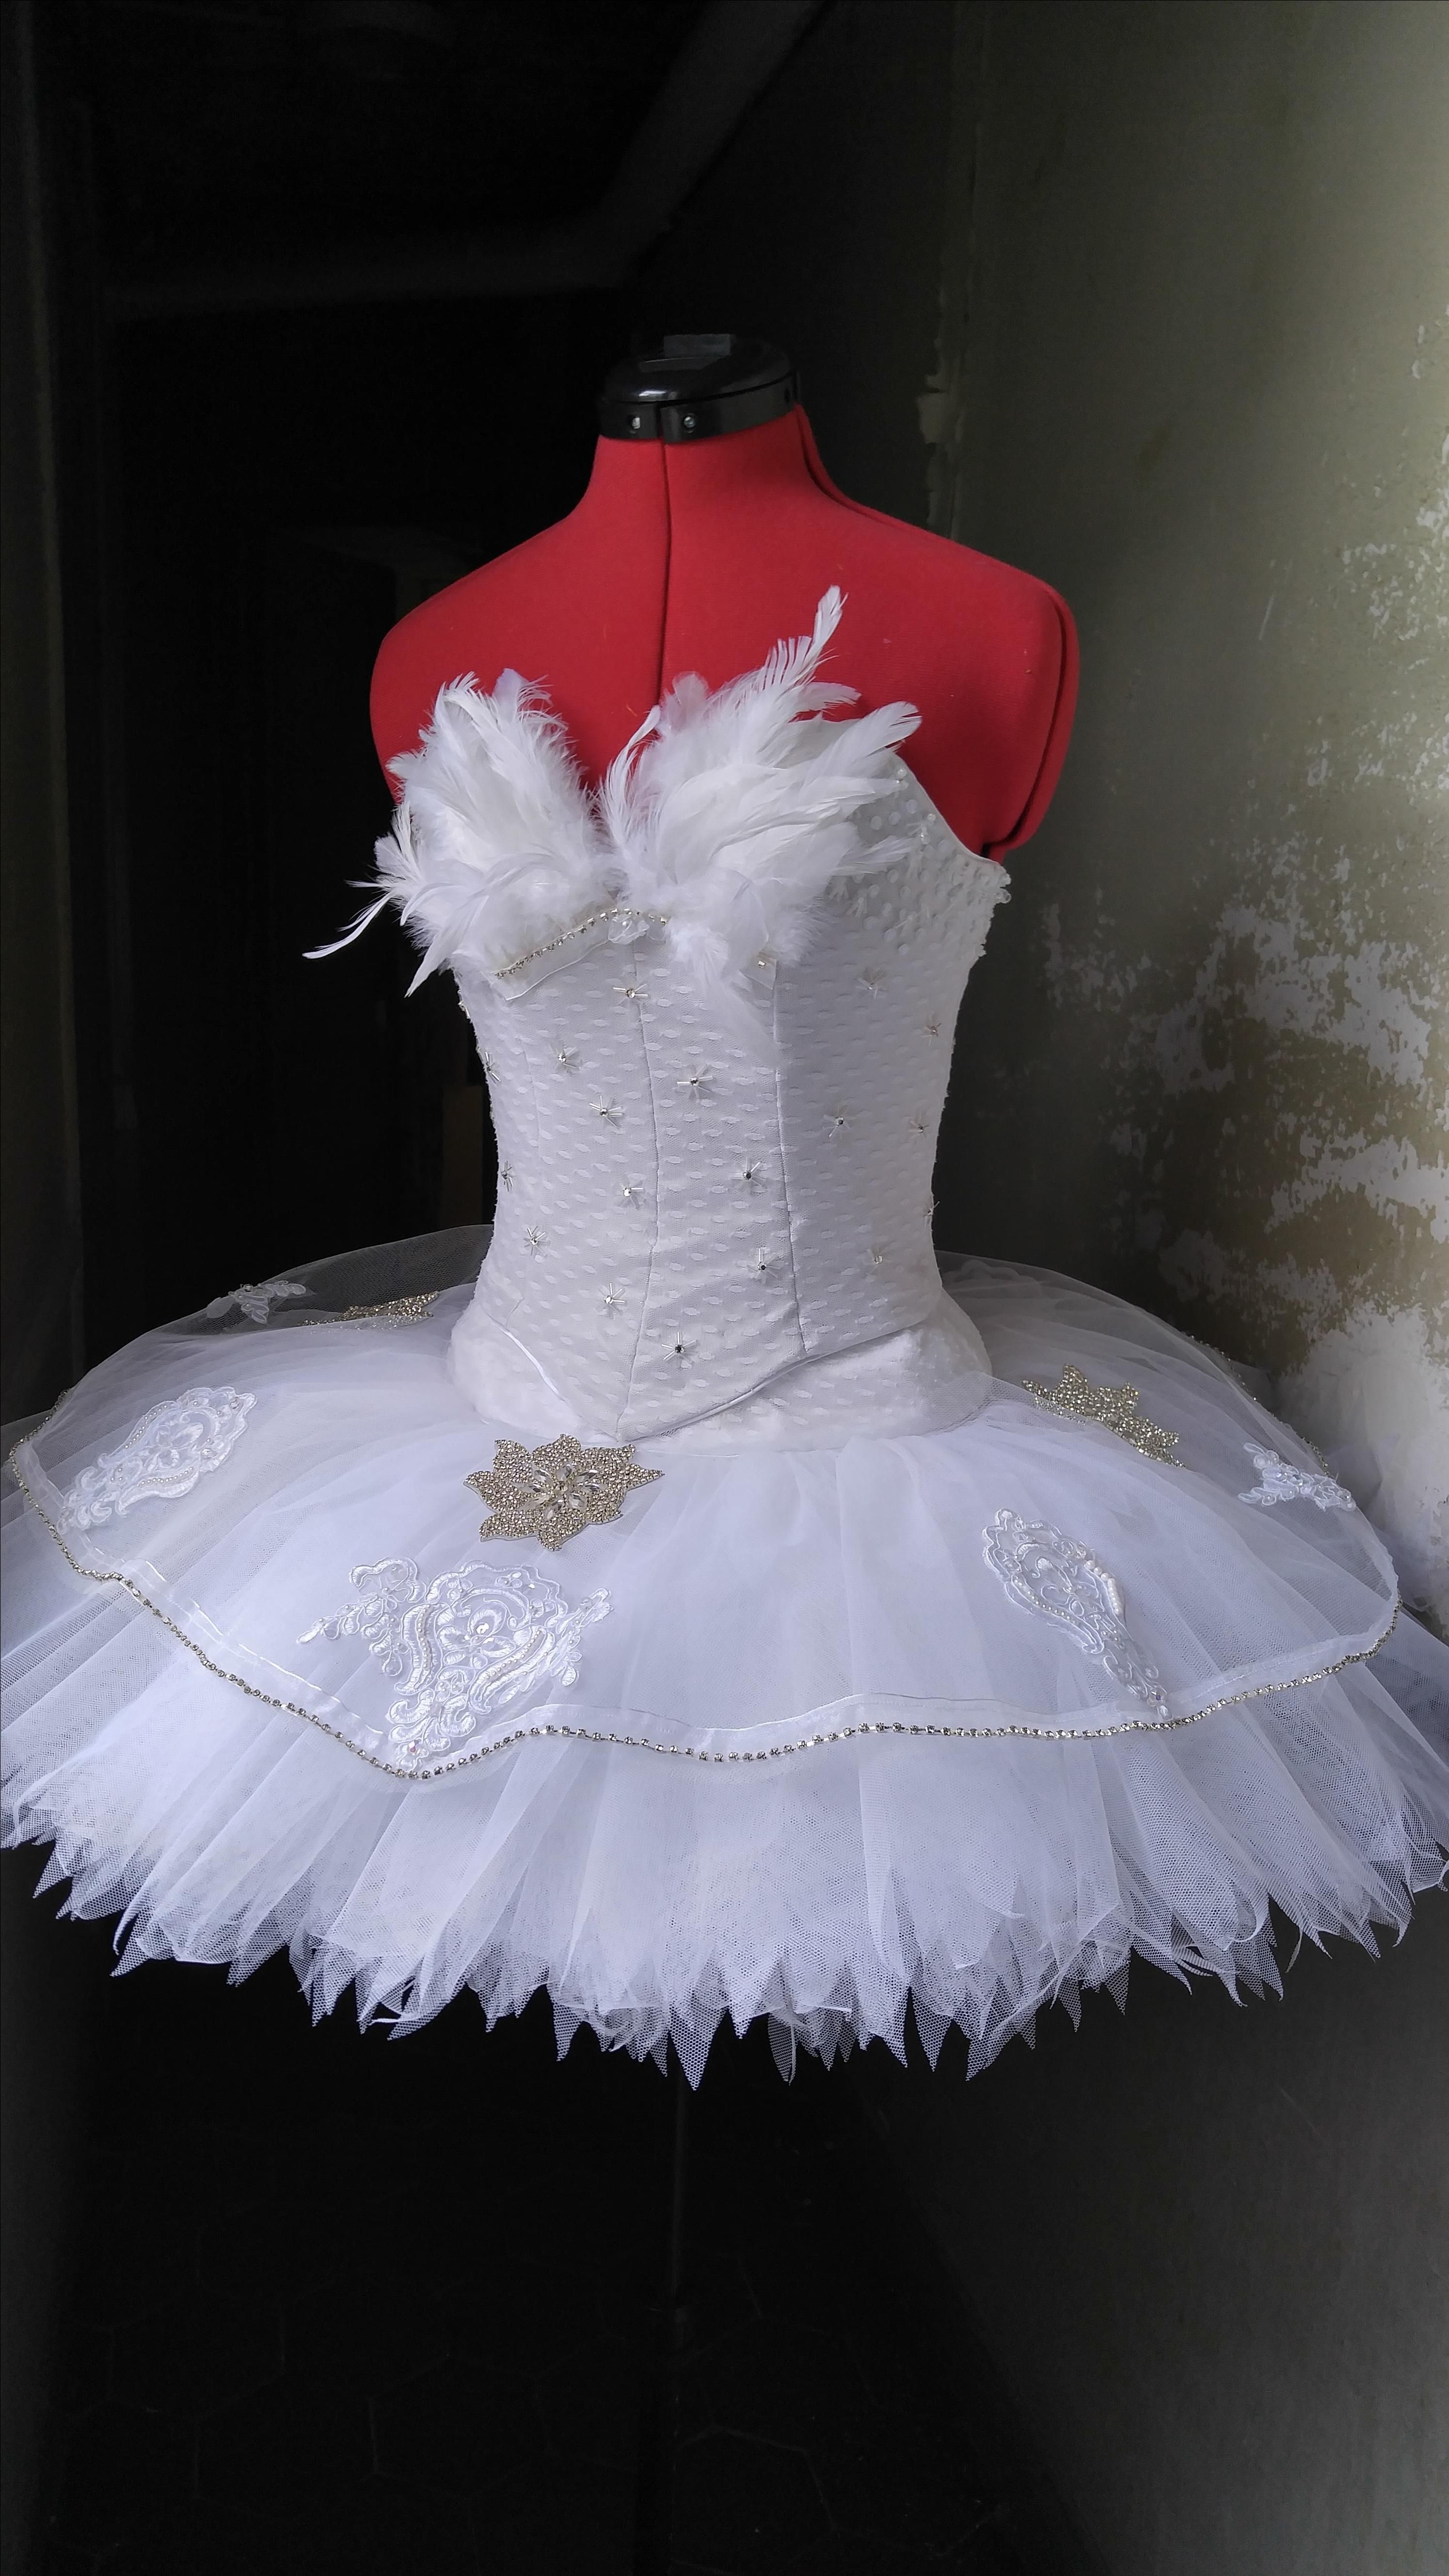 Handmade Custom Ballet Tutu Or Performance Costume by Ethereal Costumes ...